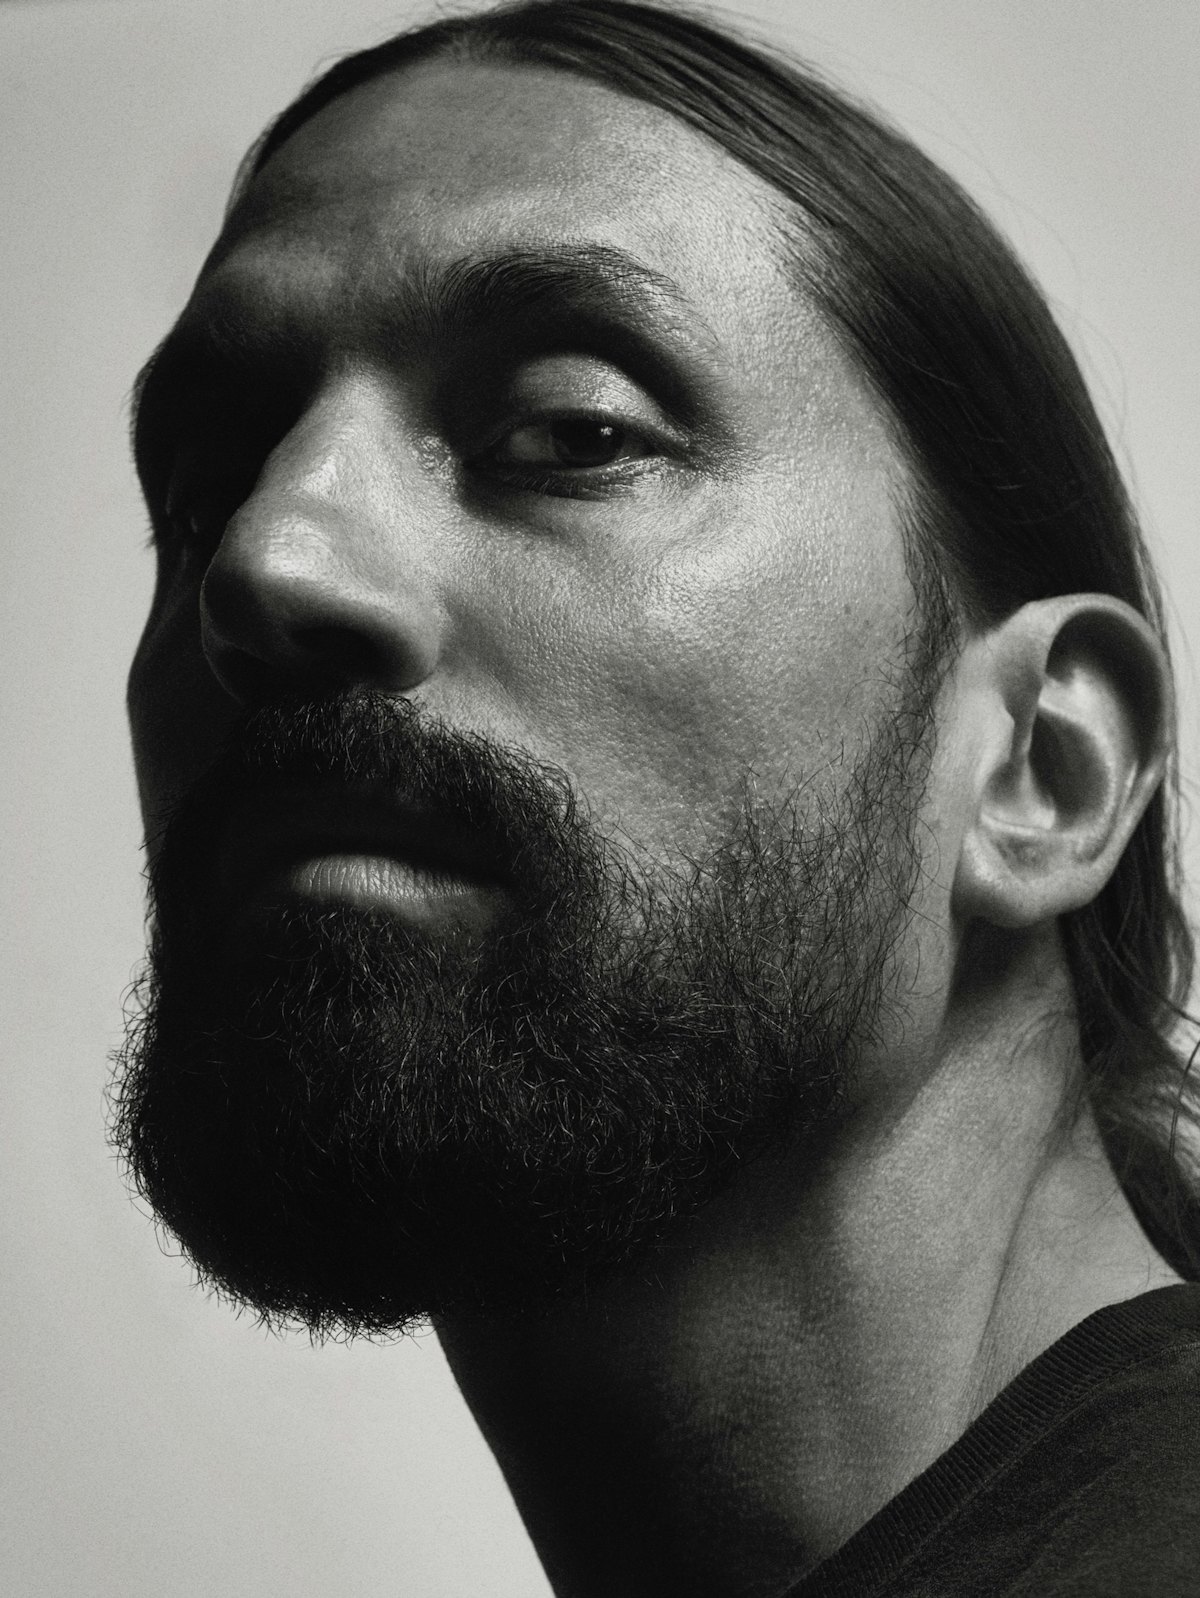 Byredo's Ben Gorham on Launching Makeup, His New Store, and More